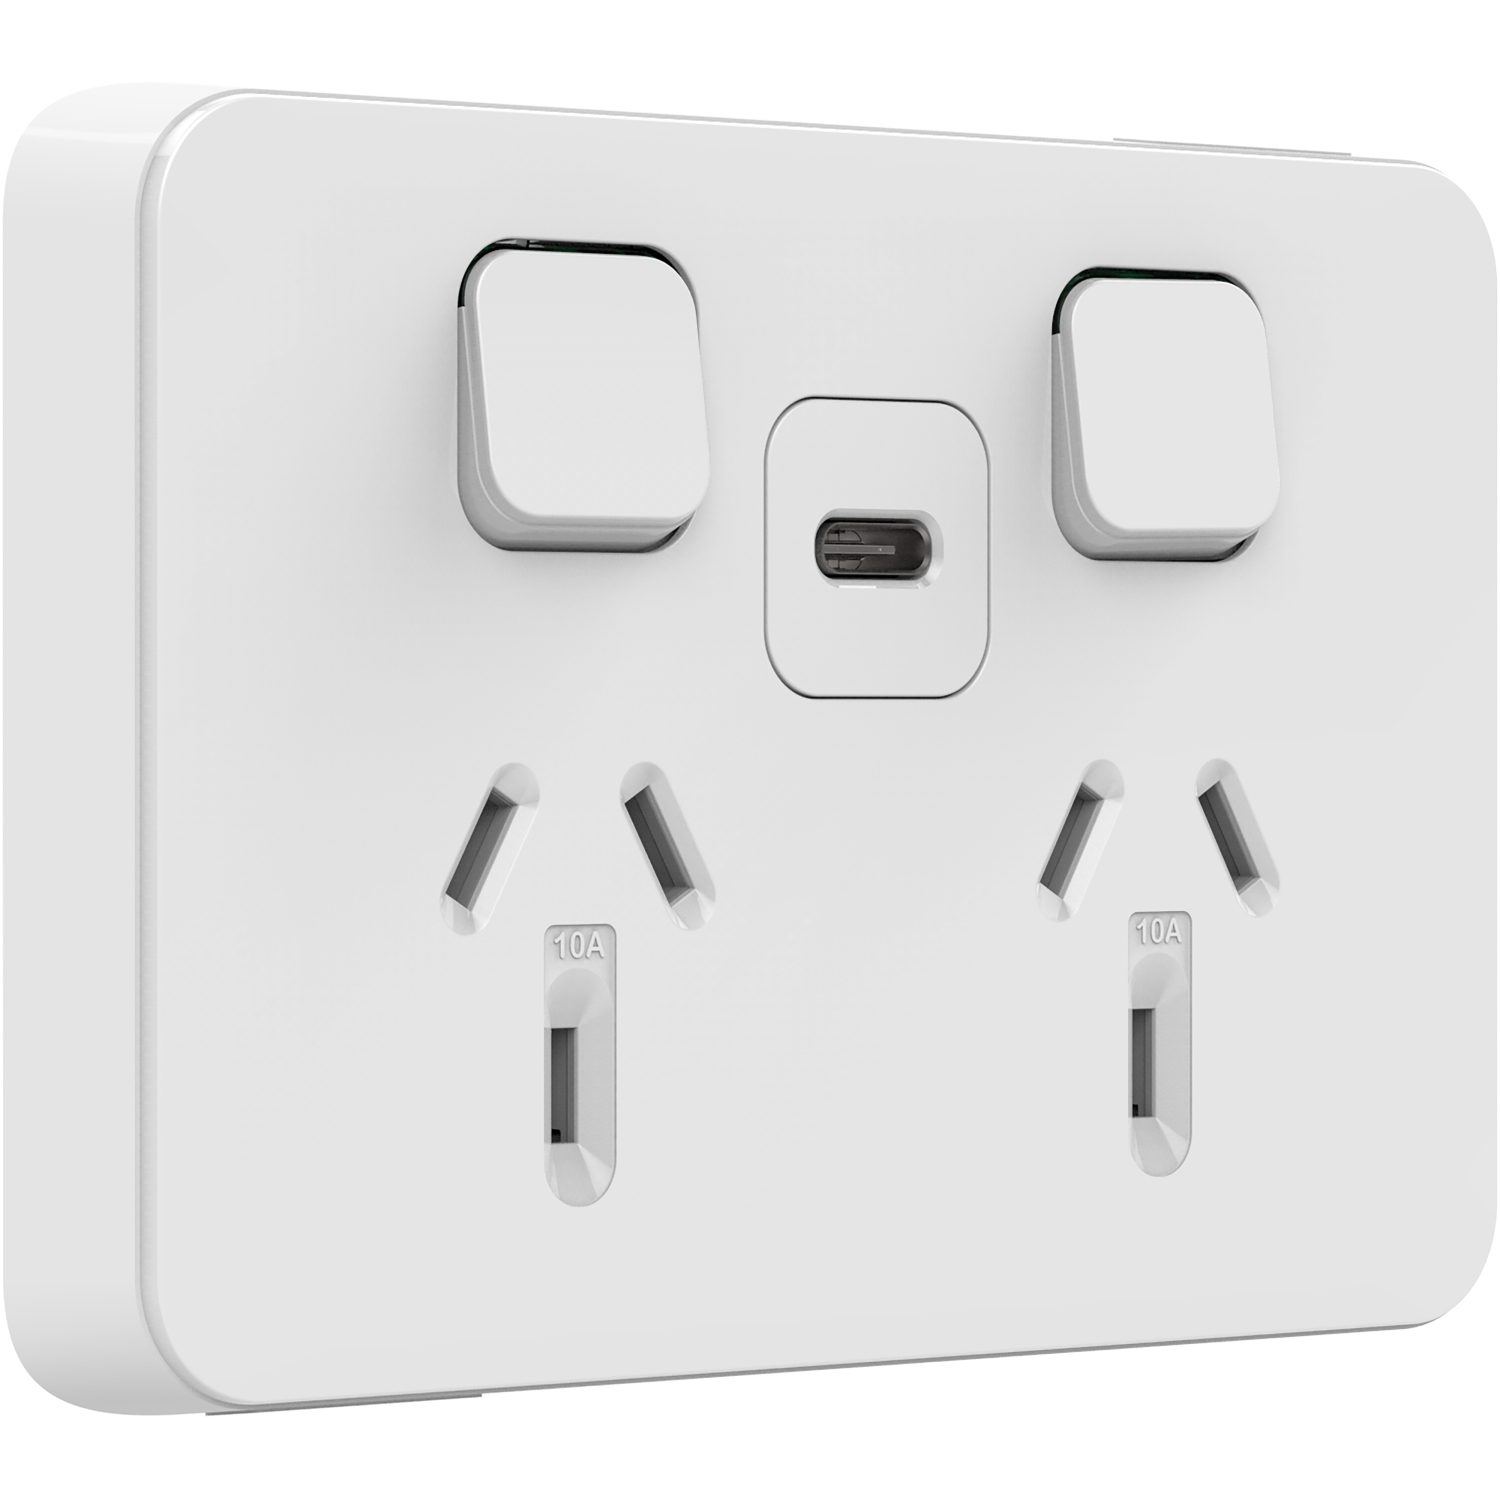 PDL Iconic - Double Switched Socket + USB Fast Charger Type C 25W - Vivid White